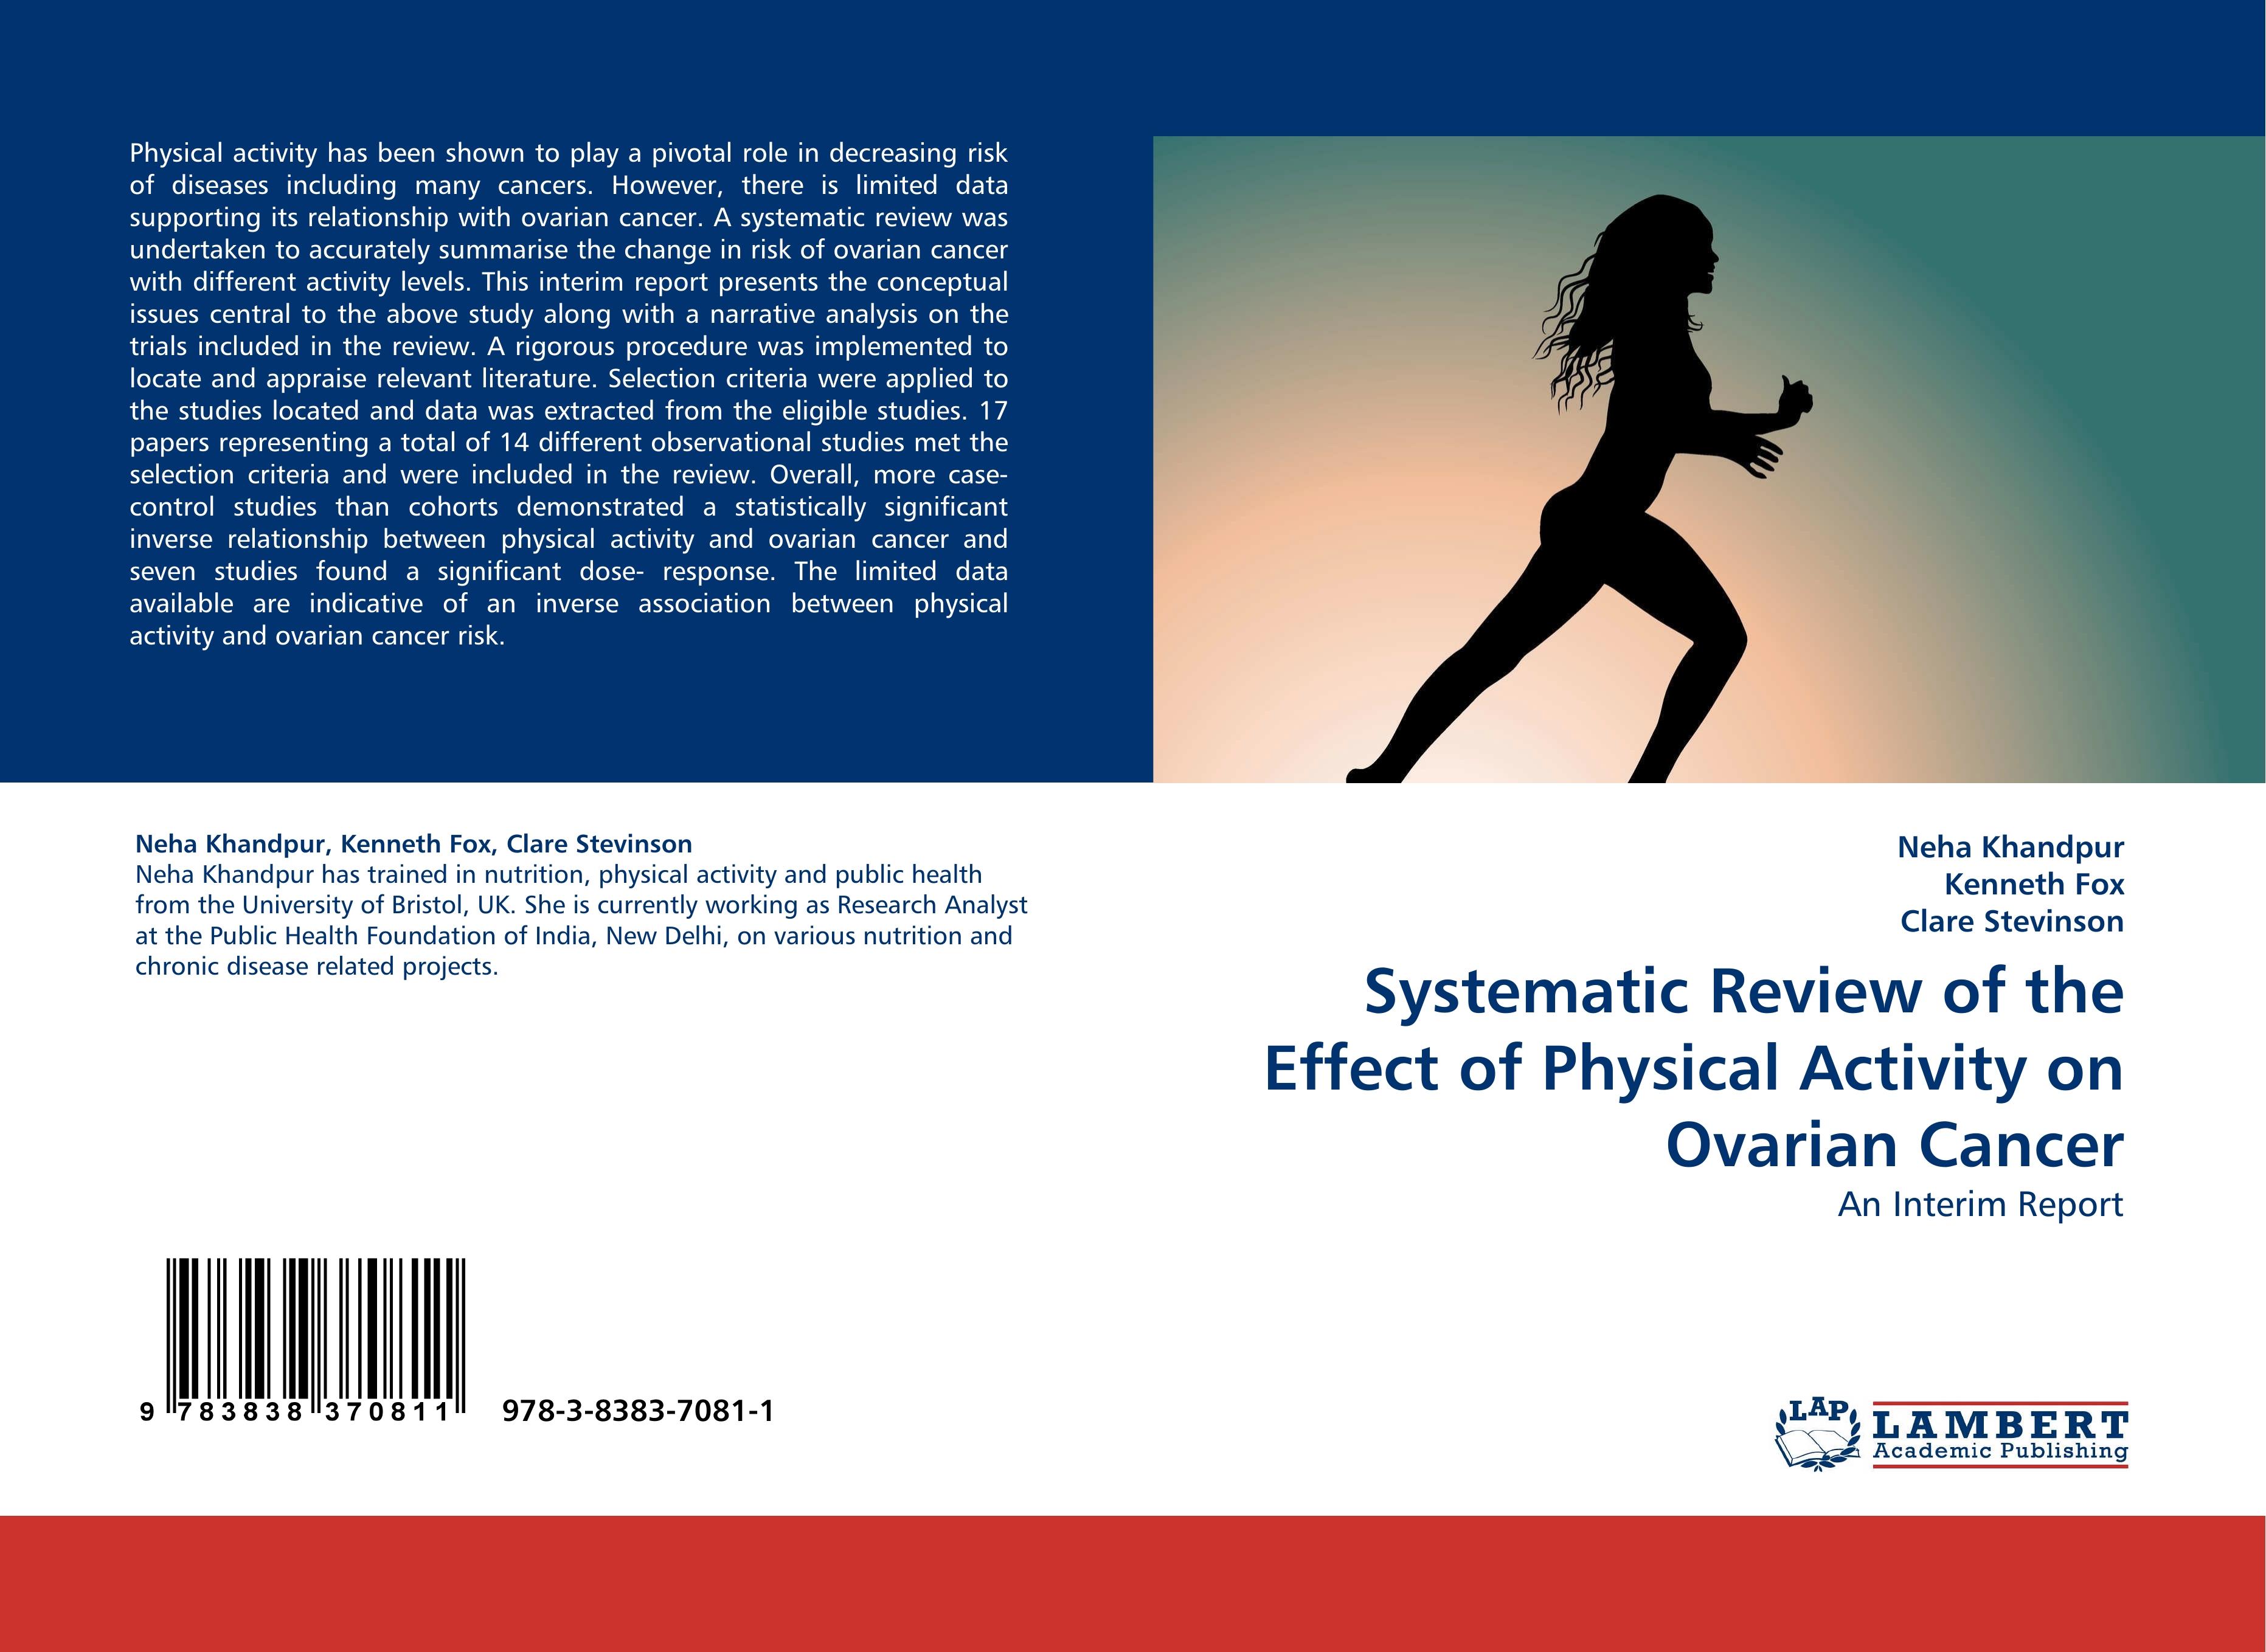 Systematic Review of the Effect of Physical Activity on Ovarian Cancer - Neha Khandpur Kenneth Fox Clare Stevinson